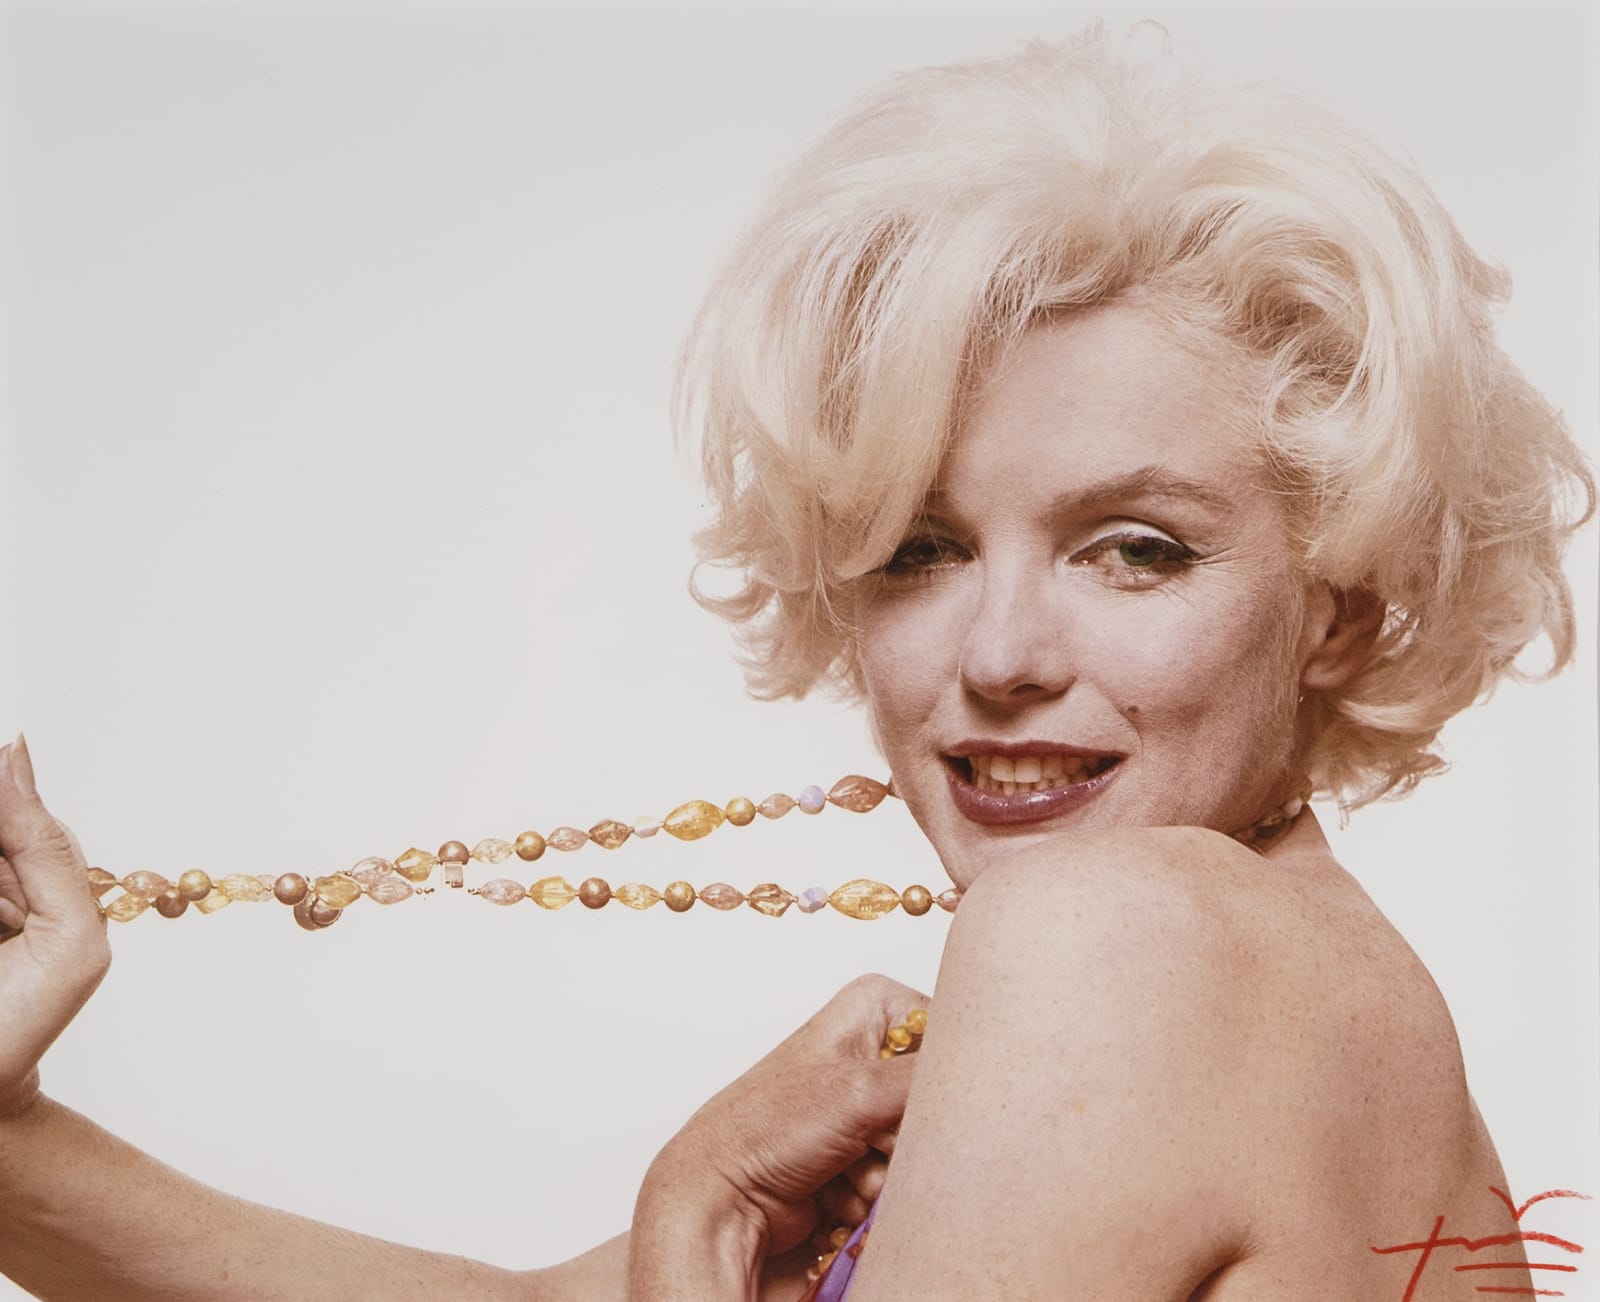 Bert Stern, Marilyn Monroe with jewels, from The Last Sitting for 